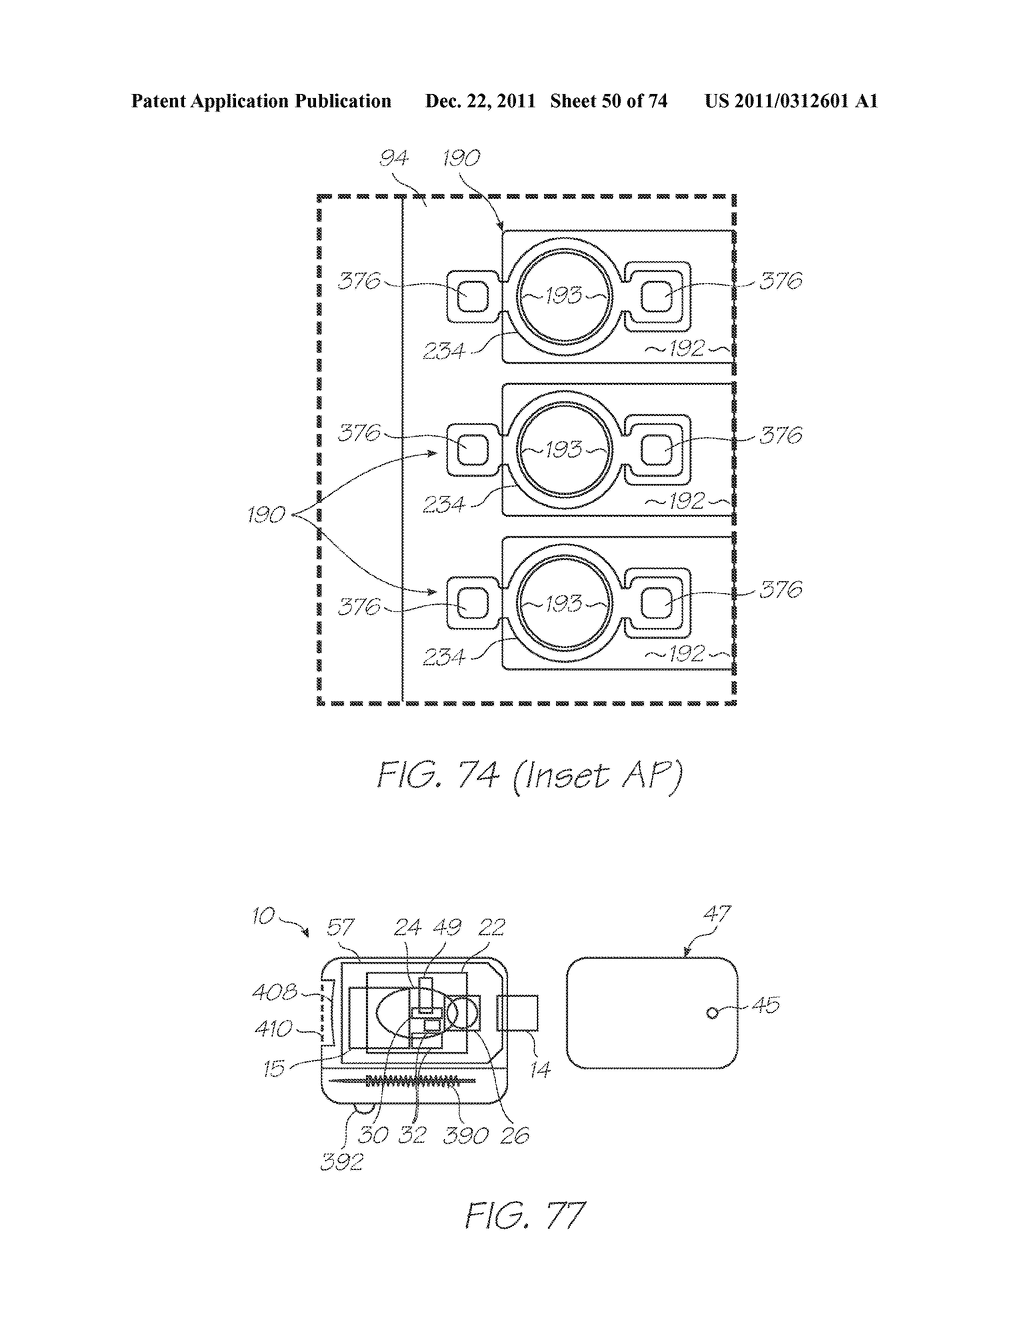 LOC DEVICE WITH DIGITAL MEMORY FOR SECURE STORAGE OF DATA - diagram, schematic, and image 51